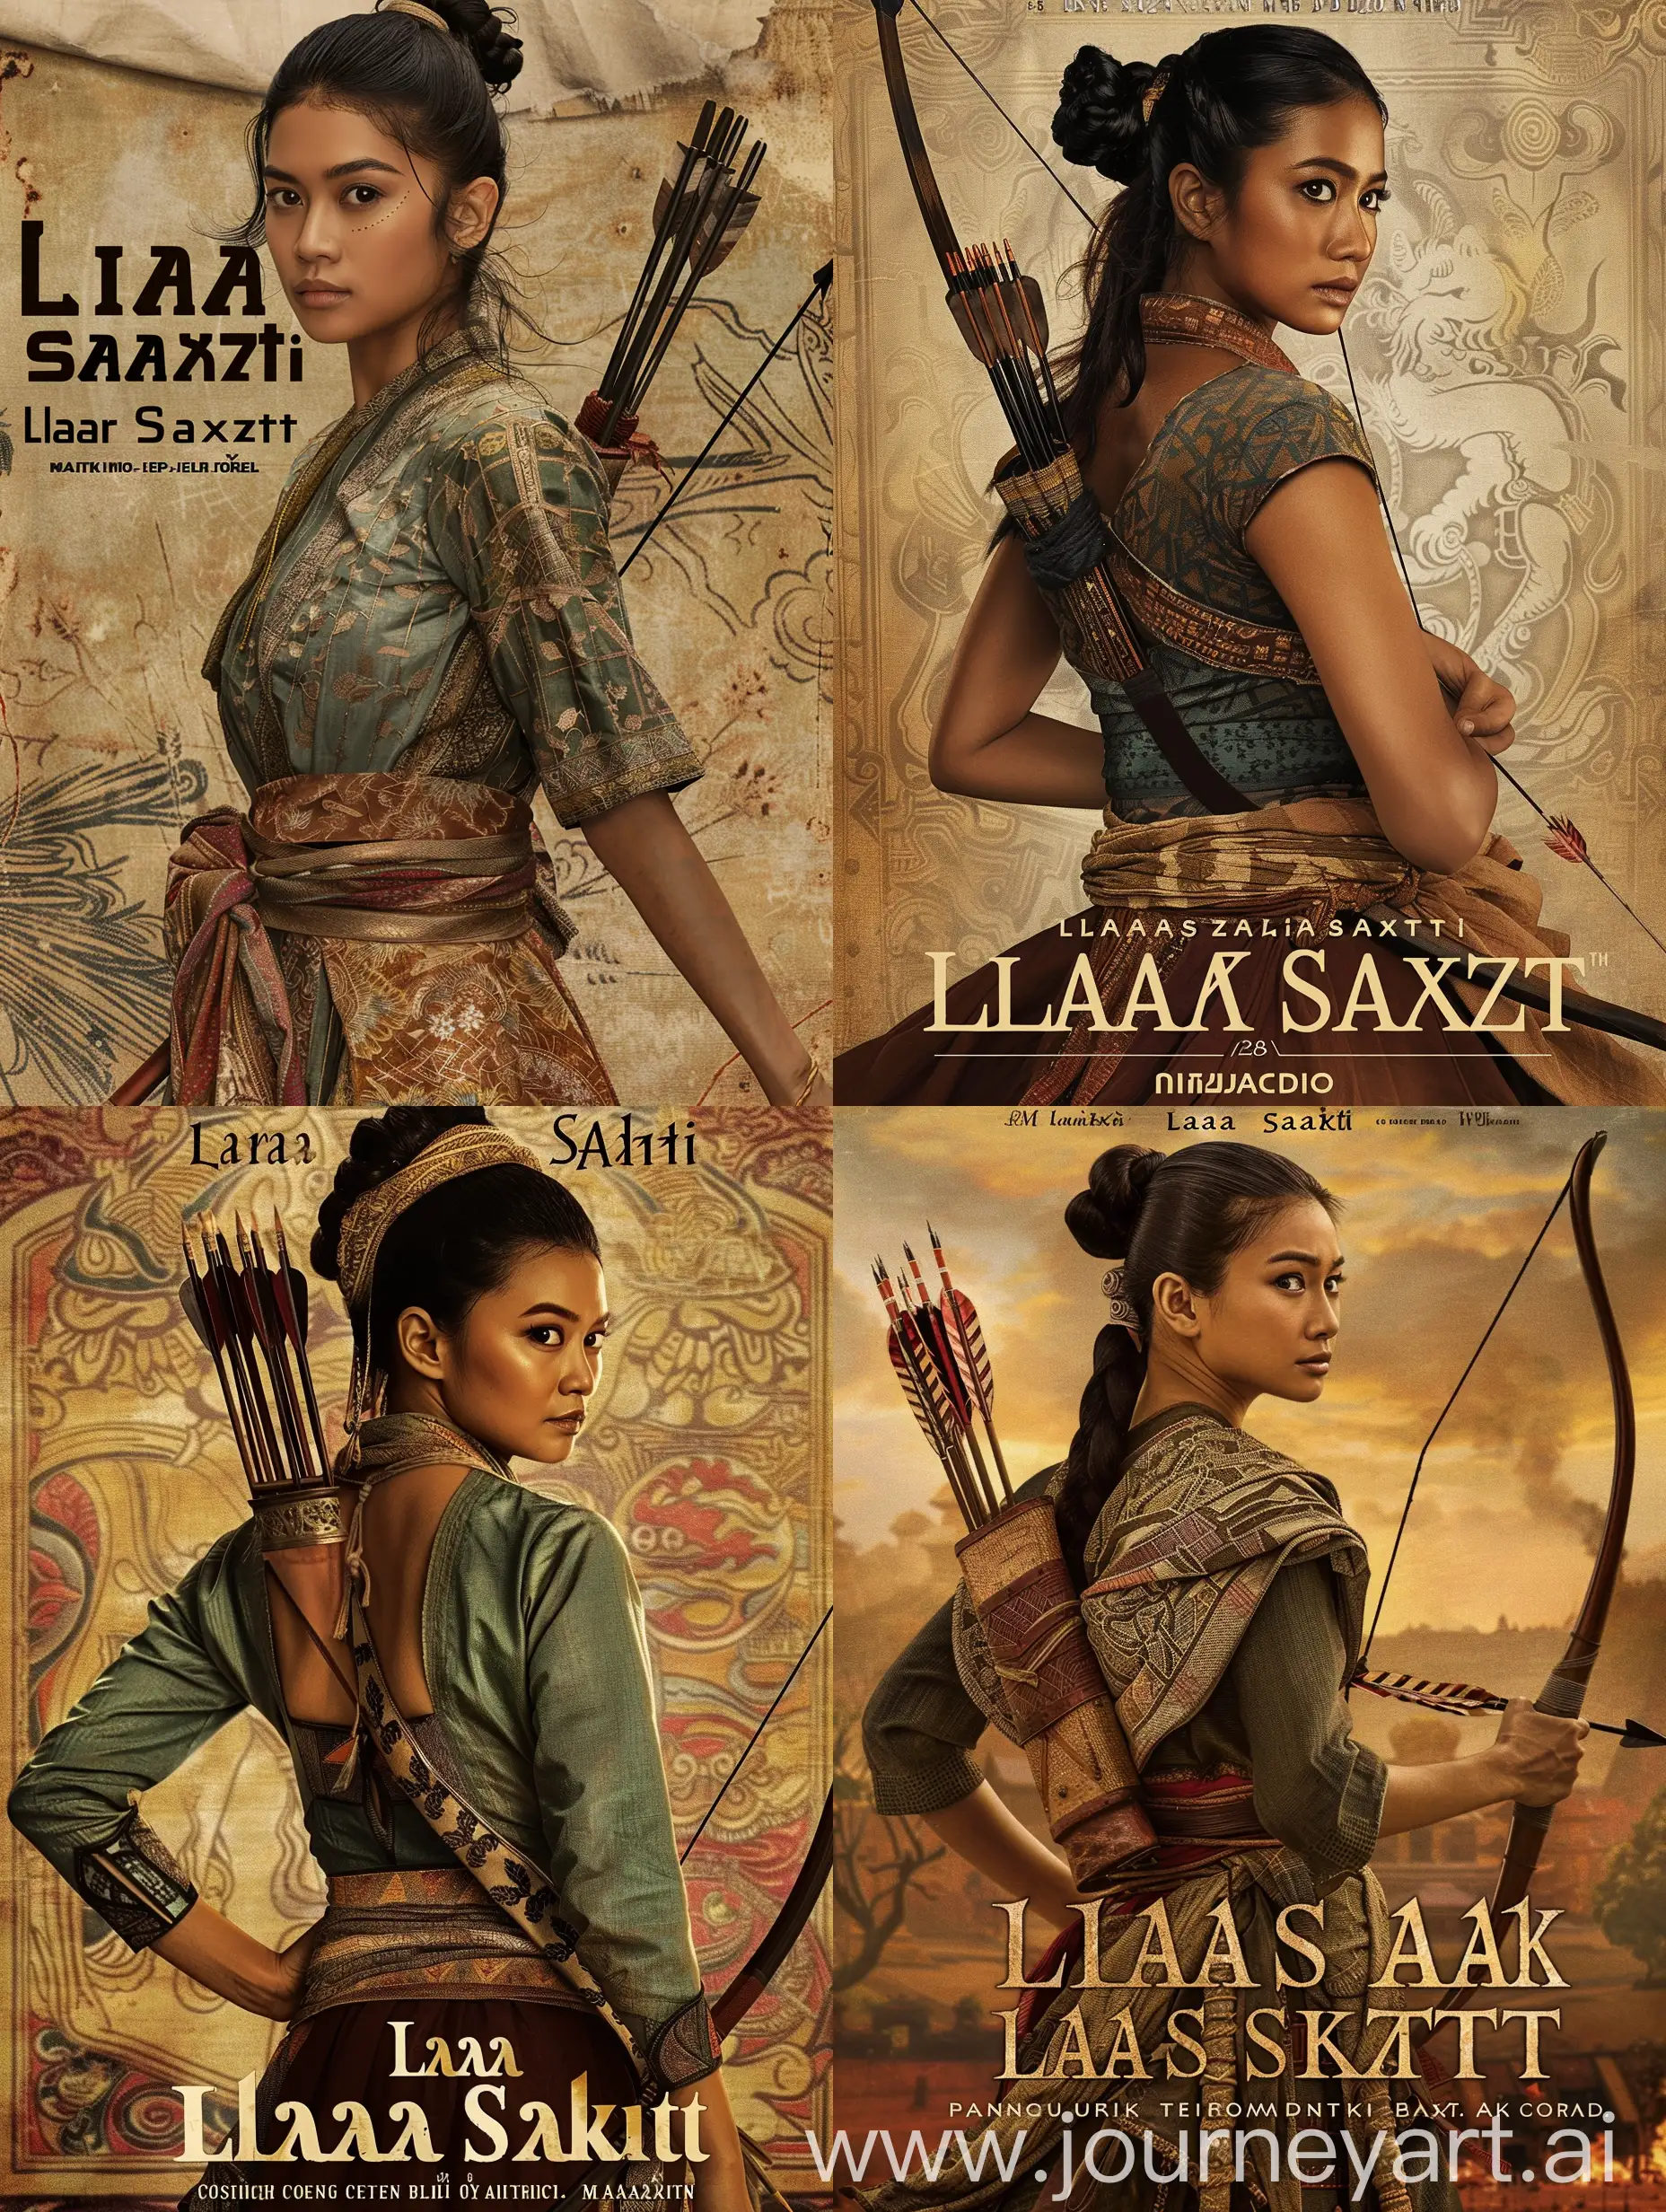 Action-Heroine-Lara-Sakti-in-Majapahit-Cultural-Dress-with-Bow-and-Arrow